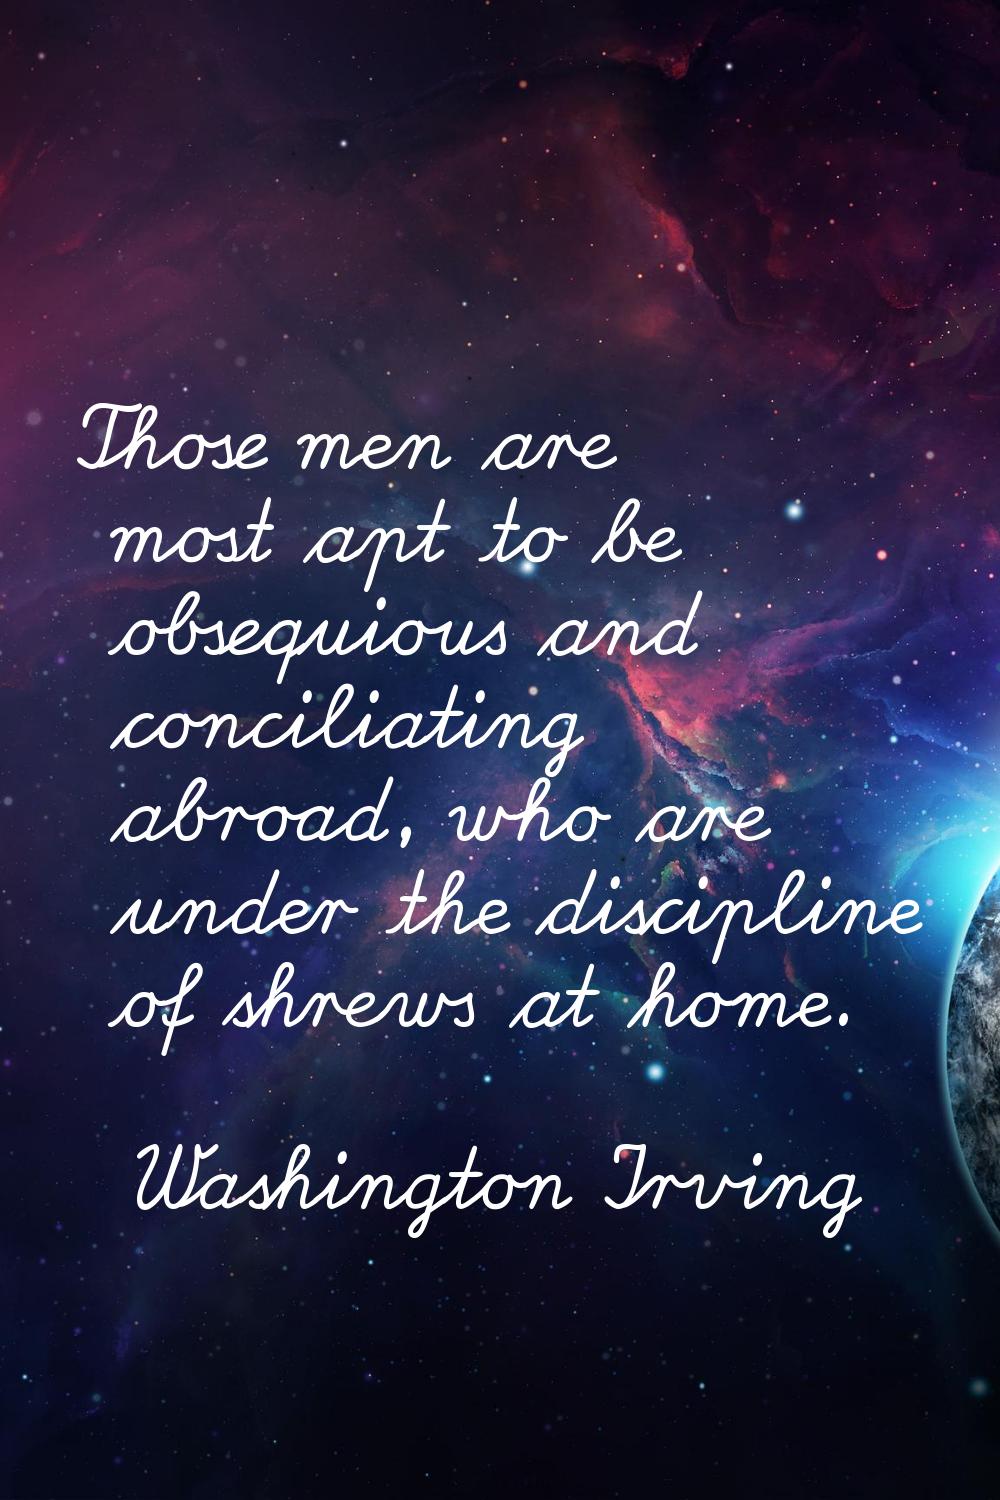 Those men are most apt to be obsequious and conciliating abroad, who are under the discipline of sh